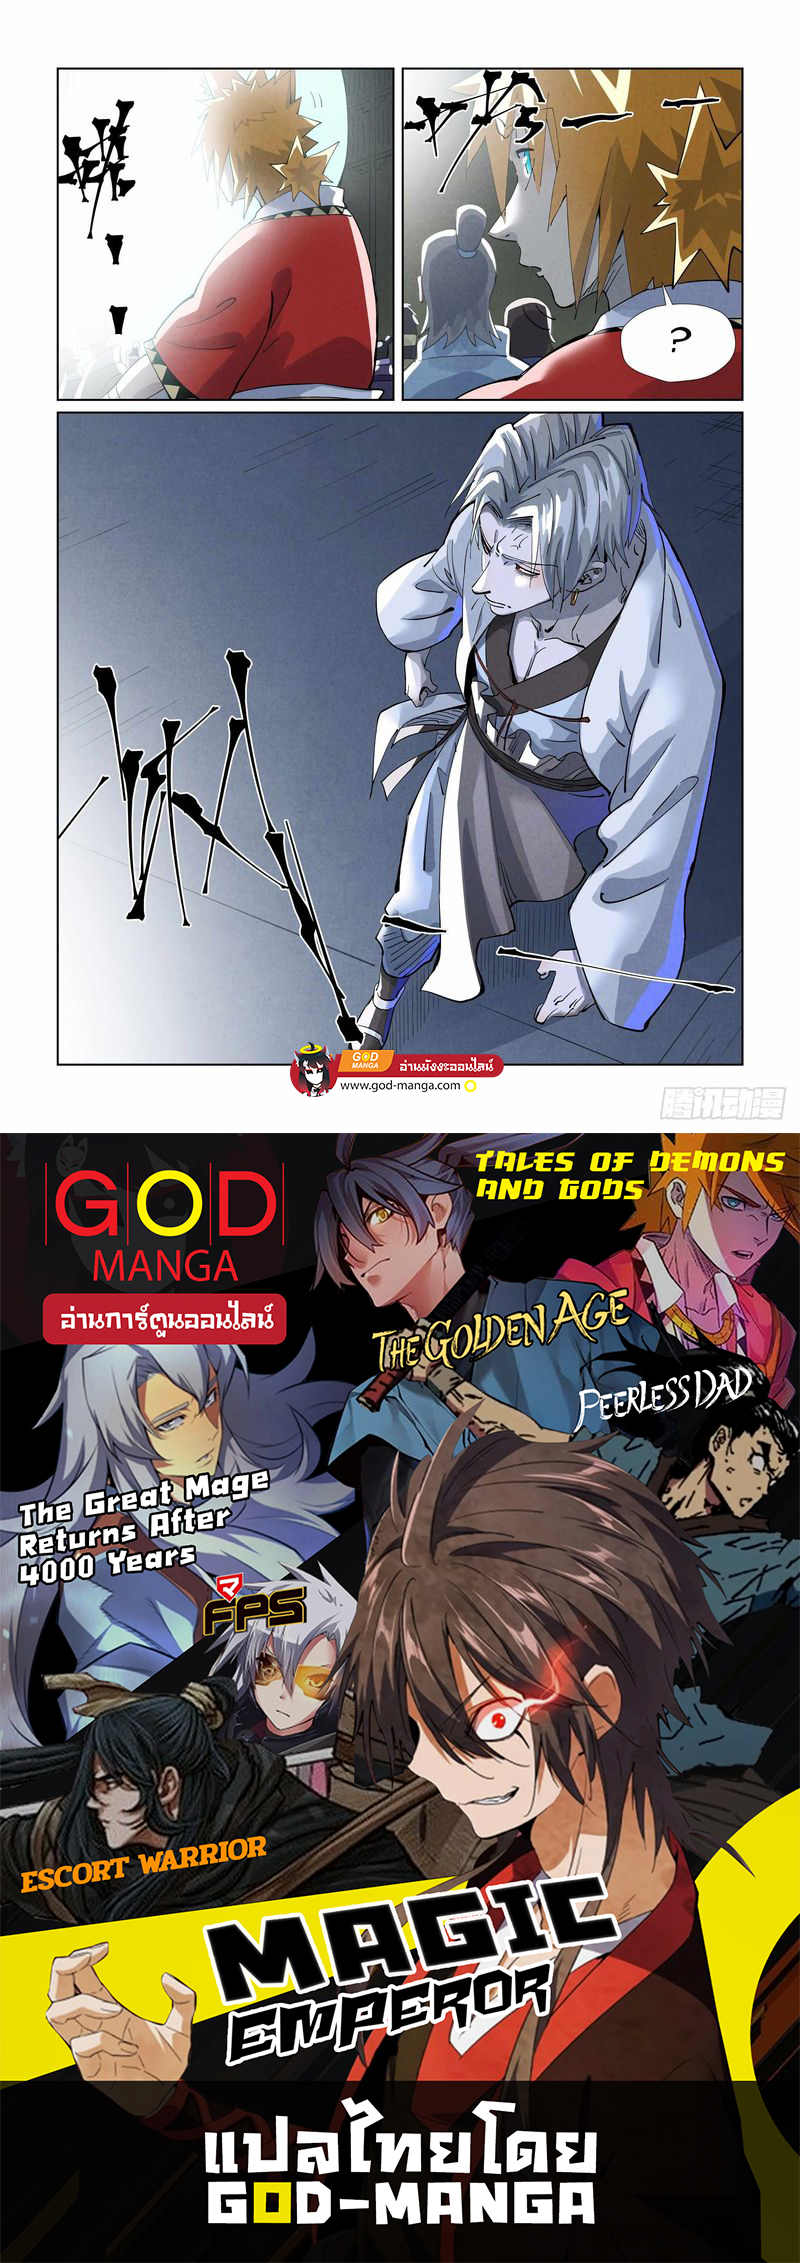 Tales of Demons and God 395 19